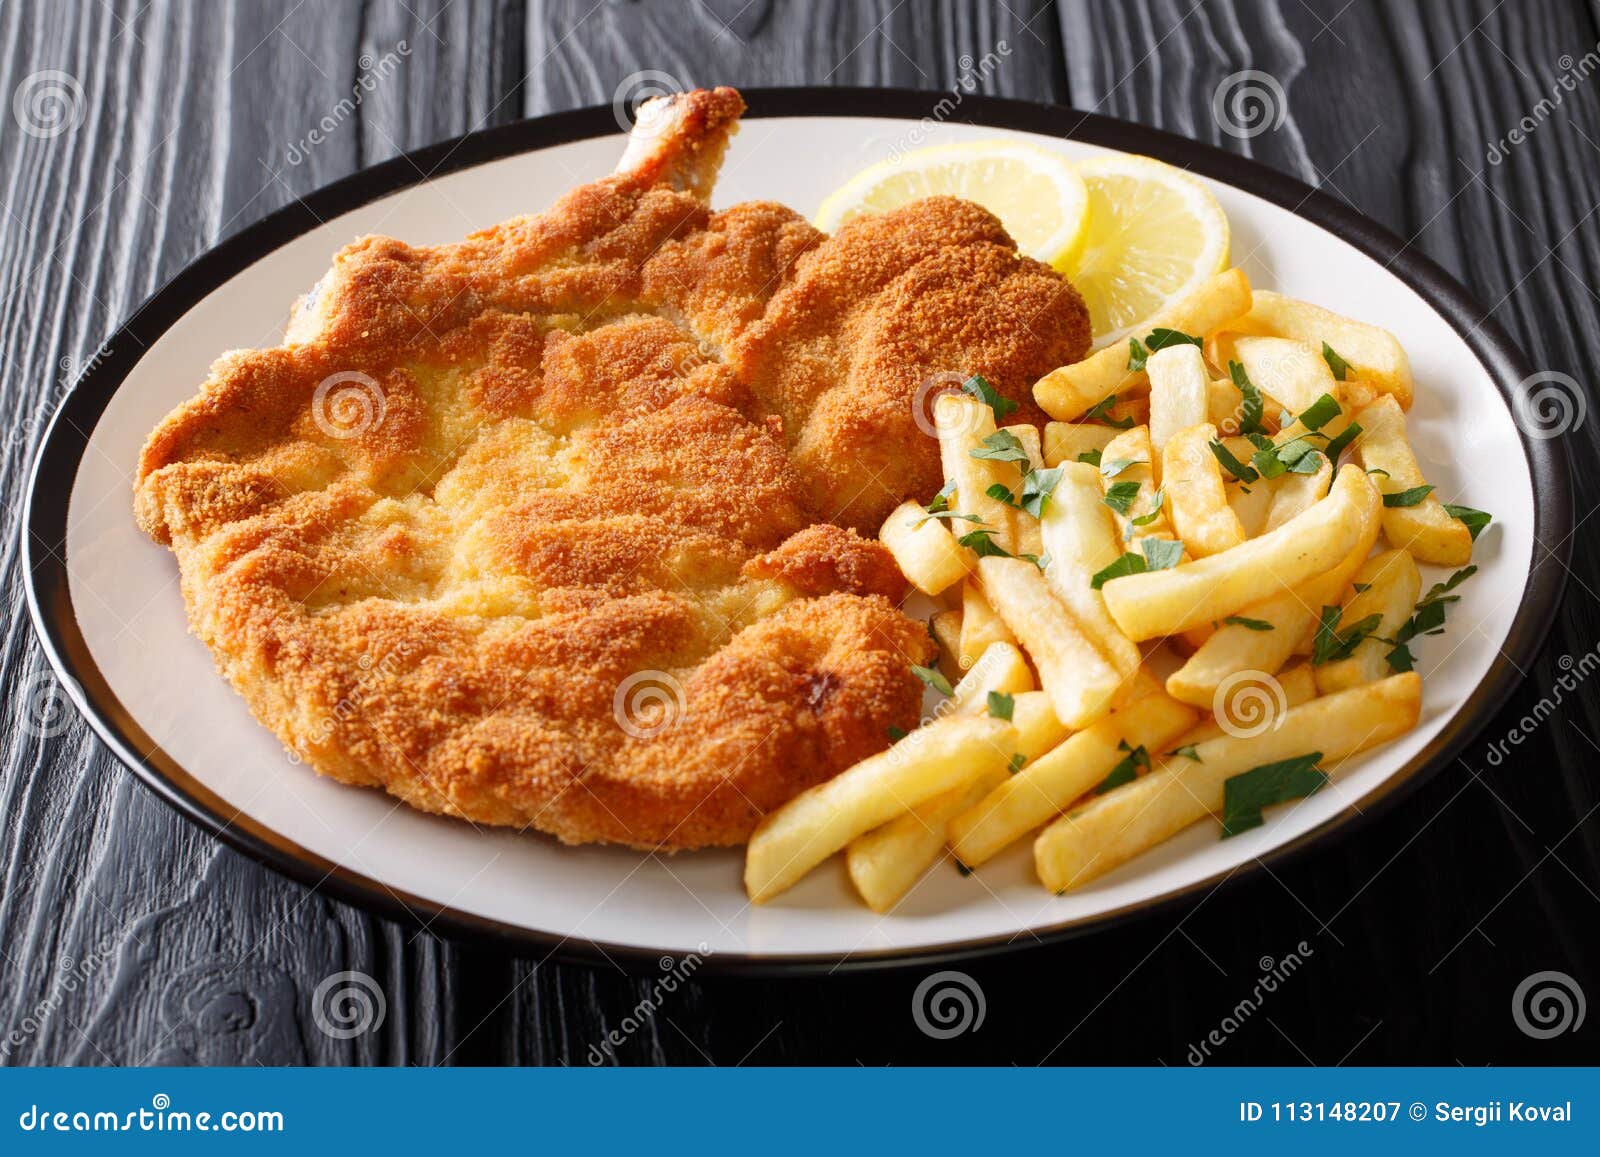 fried veal cutlet milanese with lemon and french fries close-up